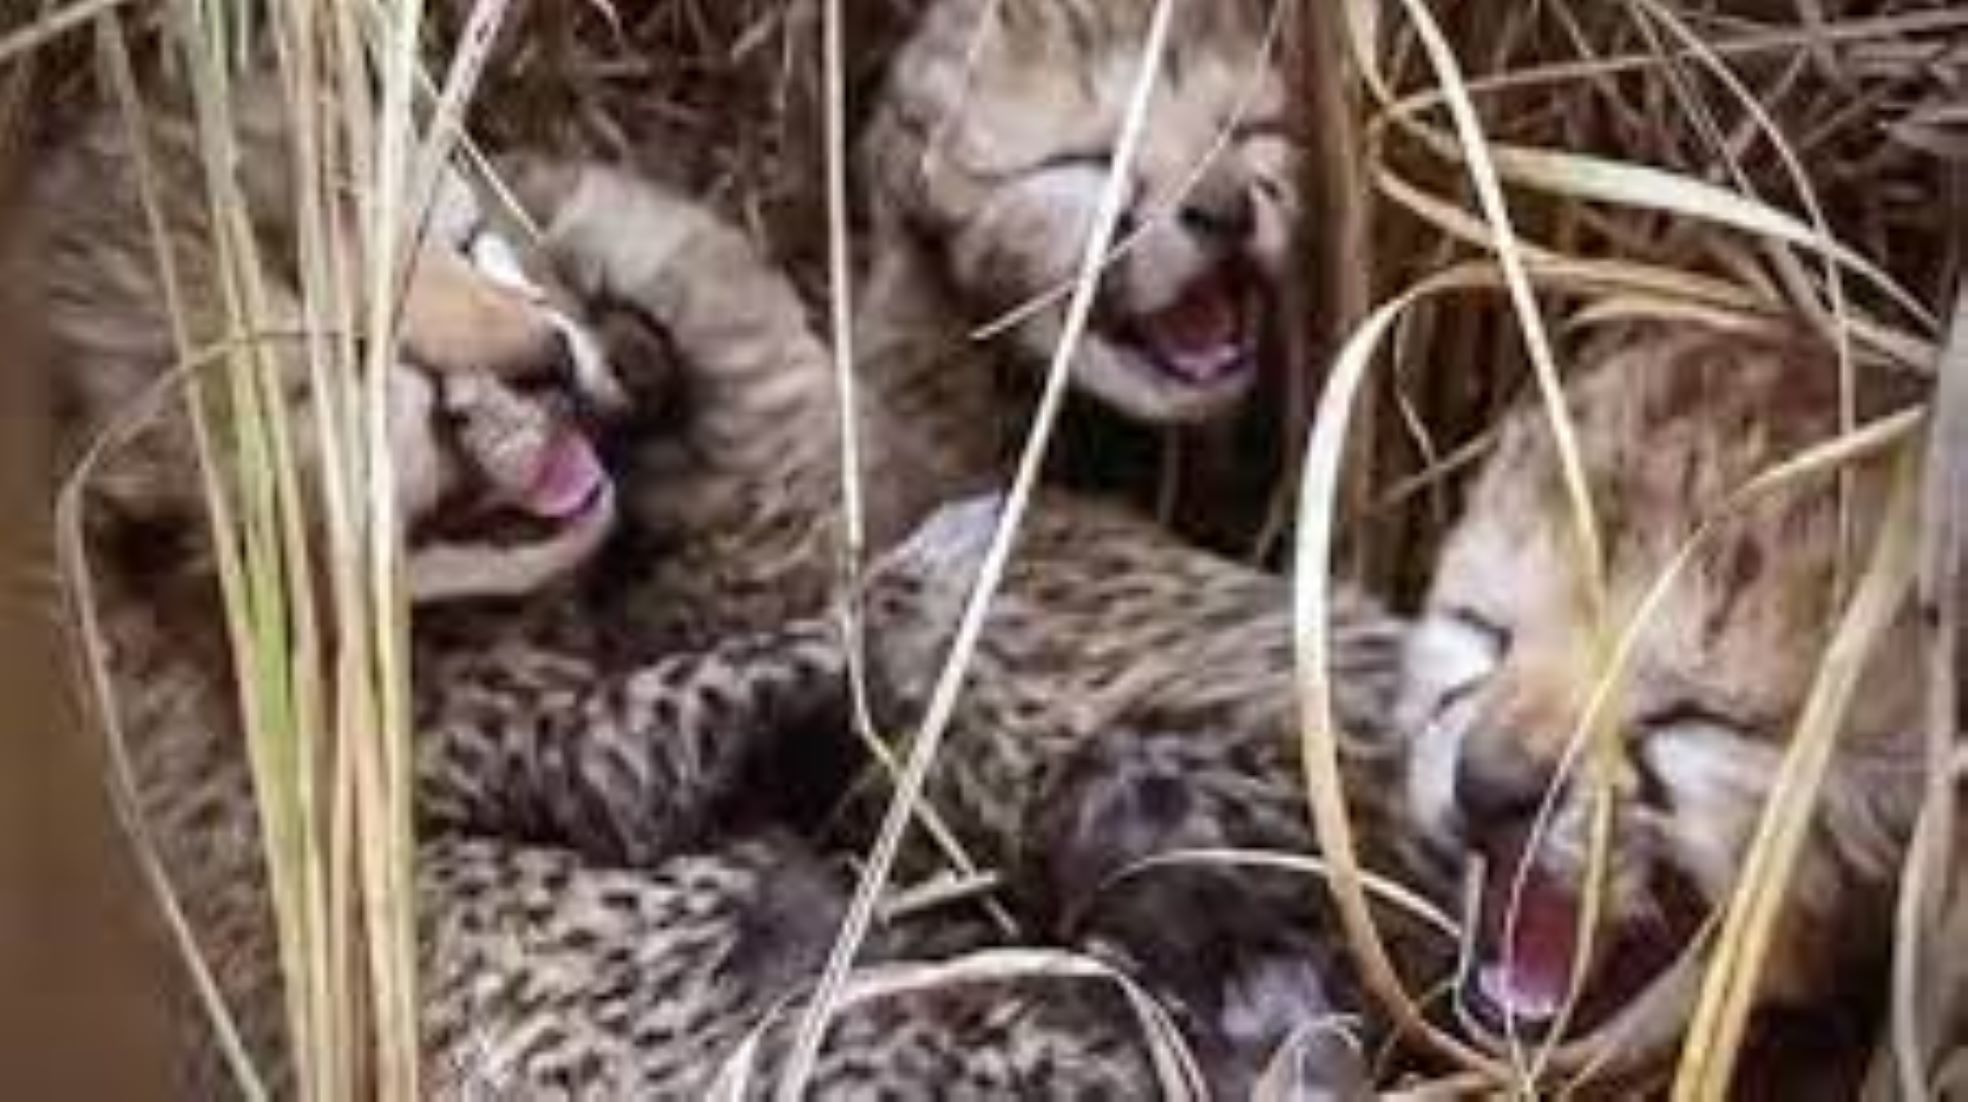 Two More Cheetah Cubs Died In India’s National Park